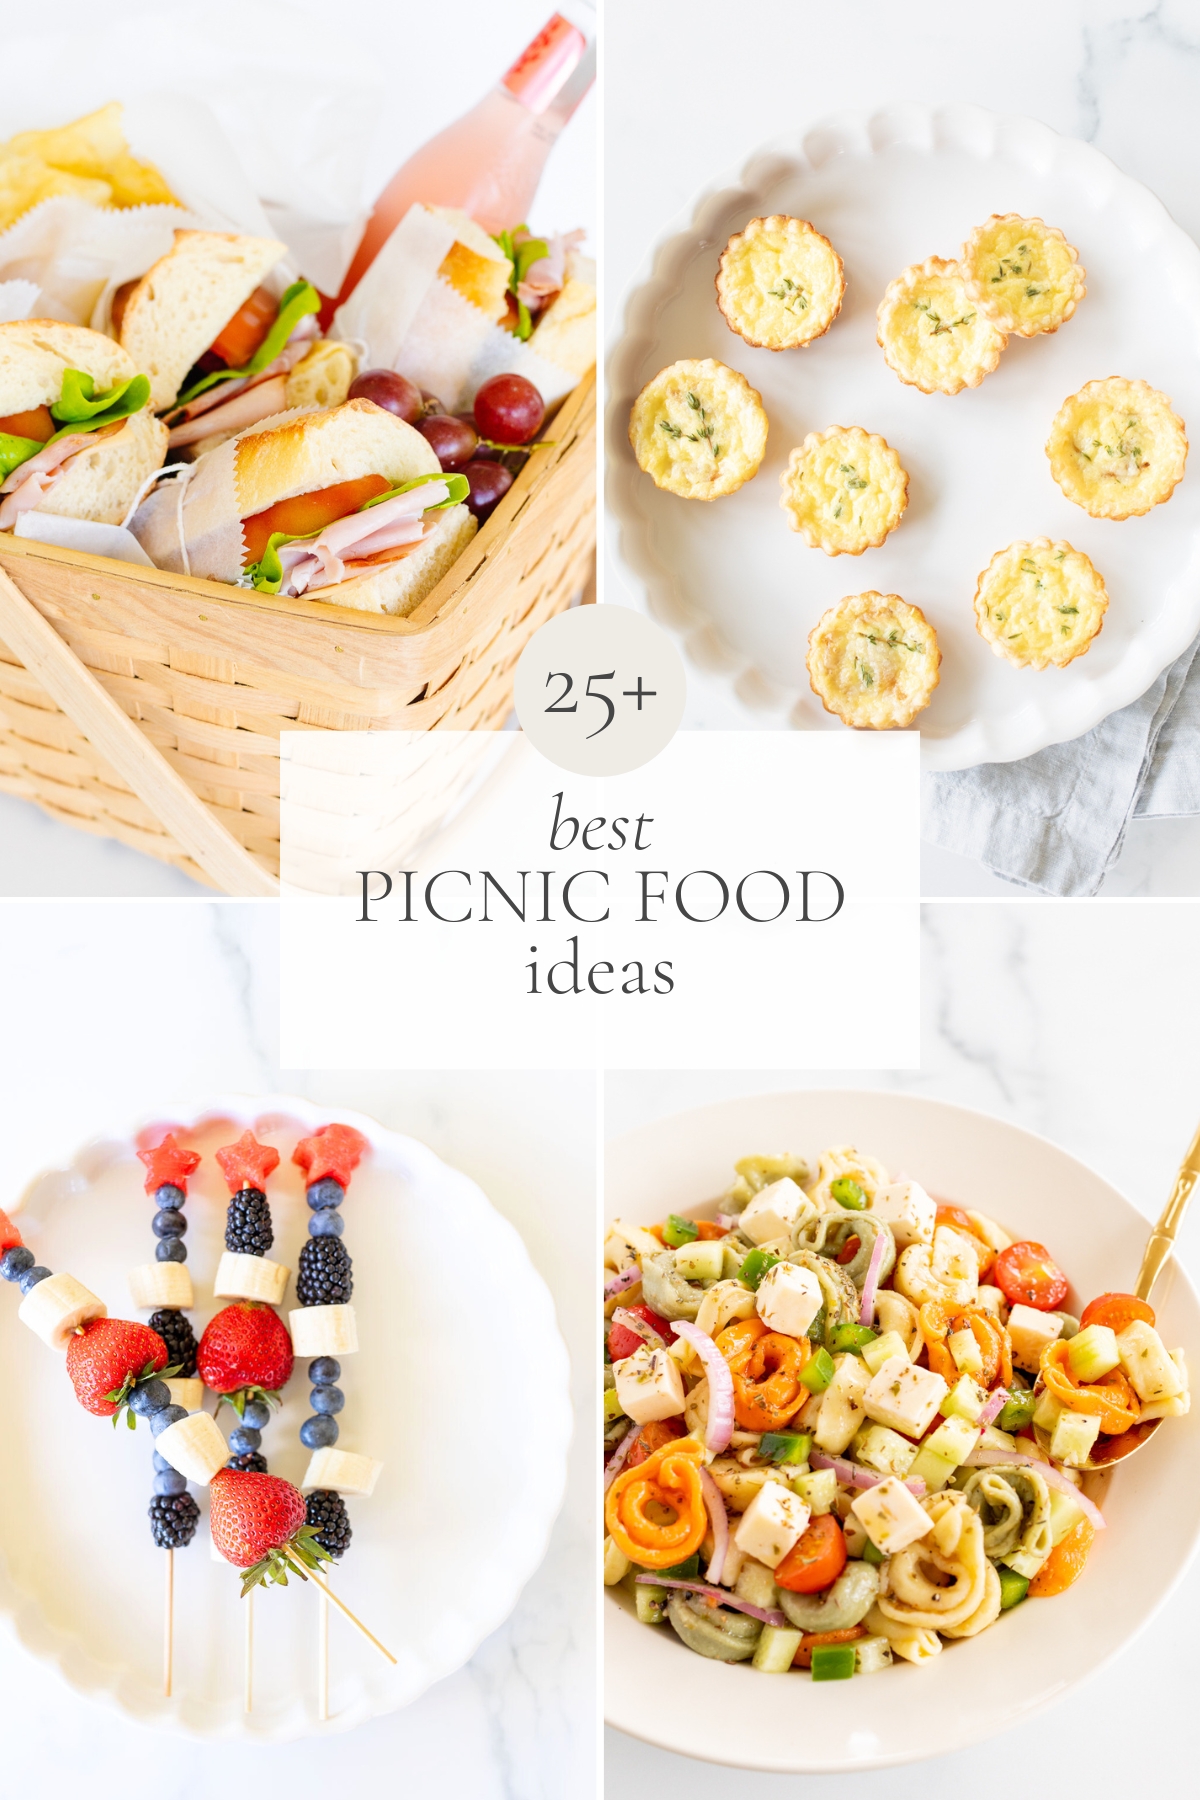 A collage showcasing the best picnic food ideas, including a basket with sandwiches and fruits, deviled eggs, fruit skewers, and a pasta salad.